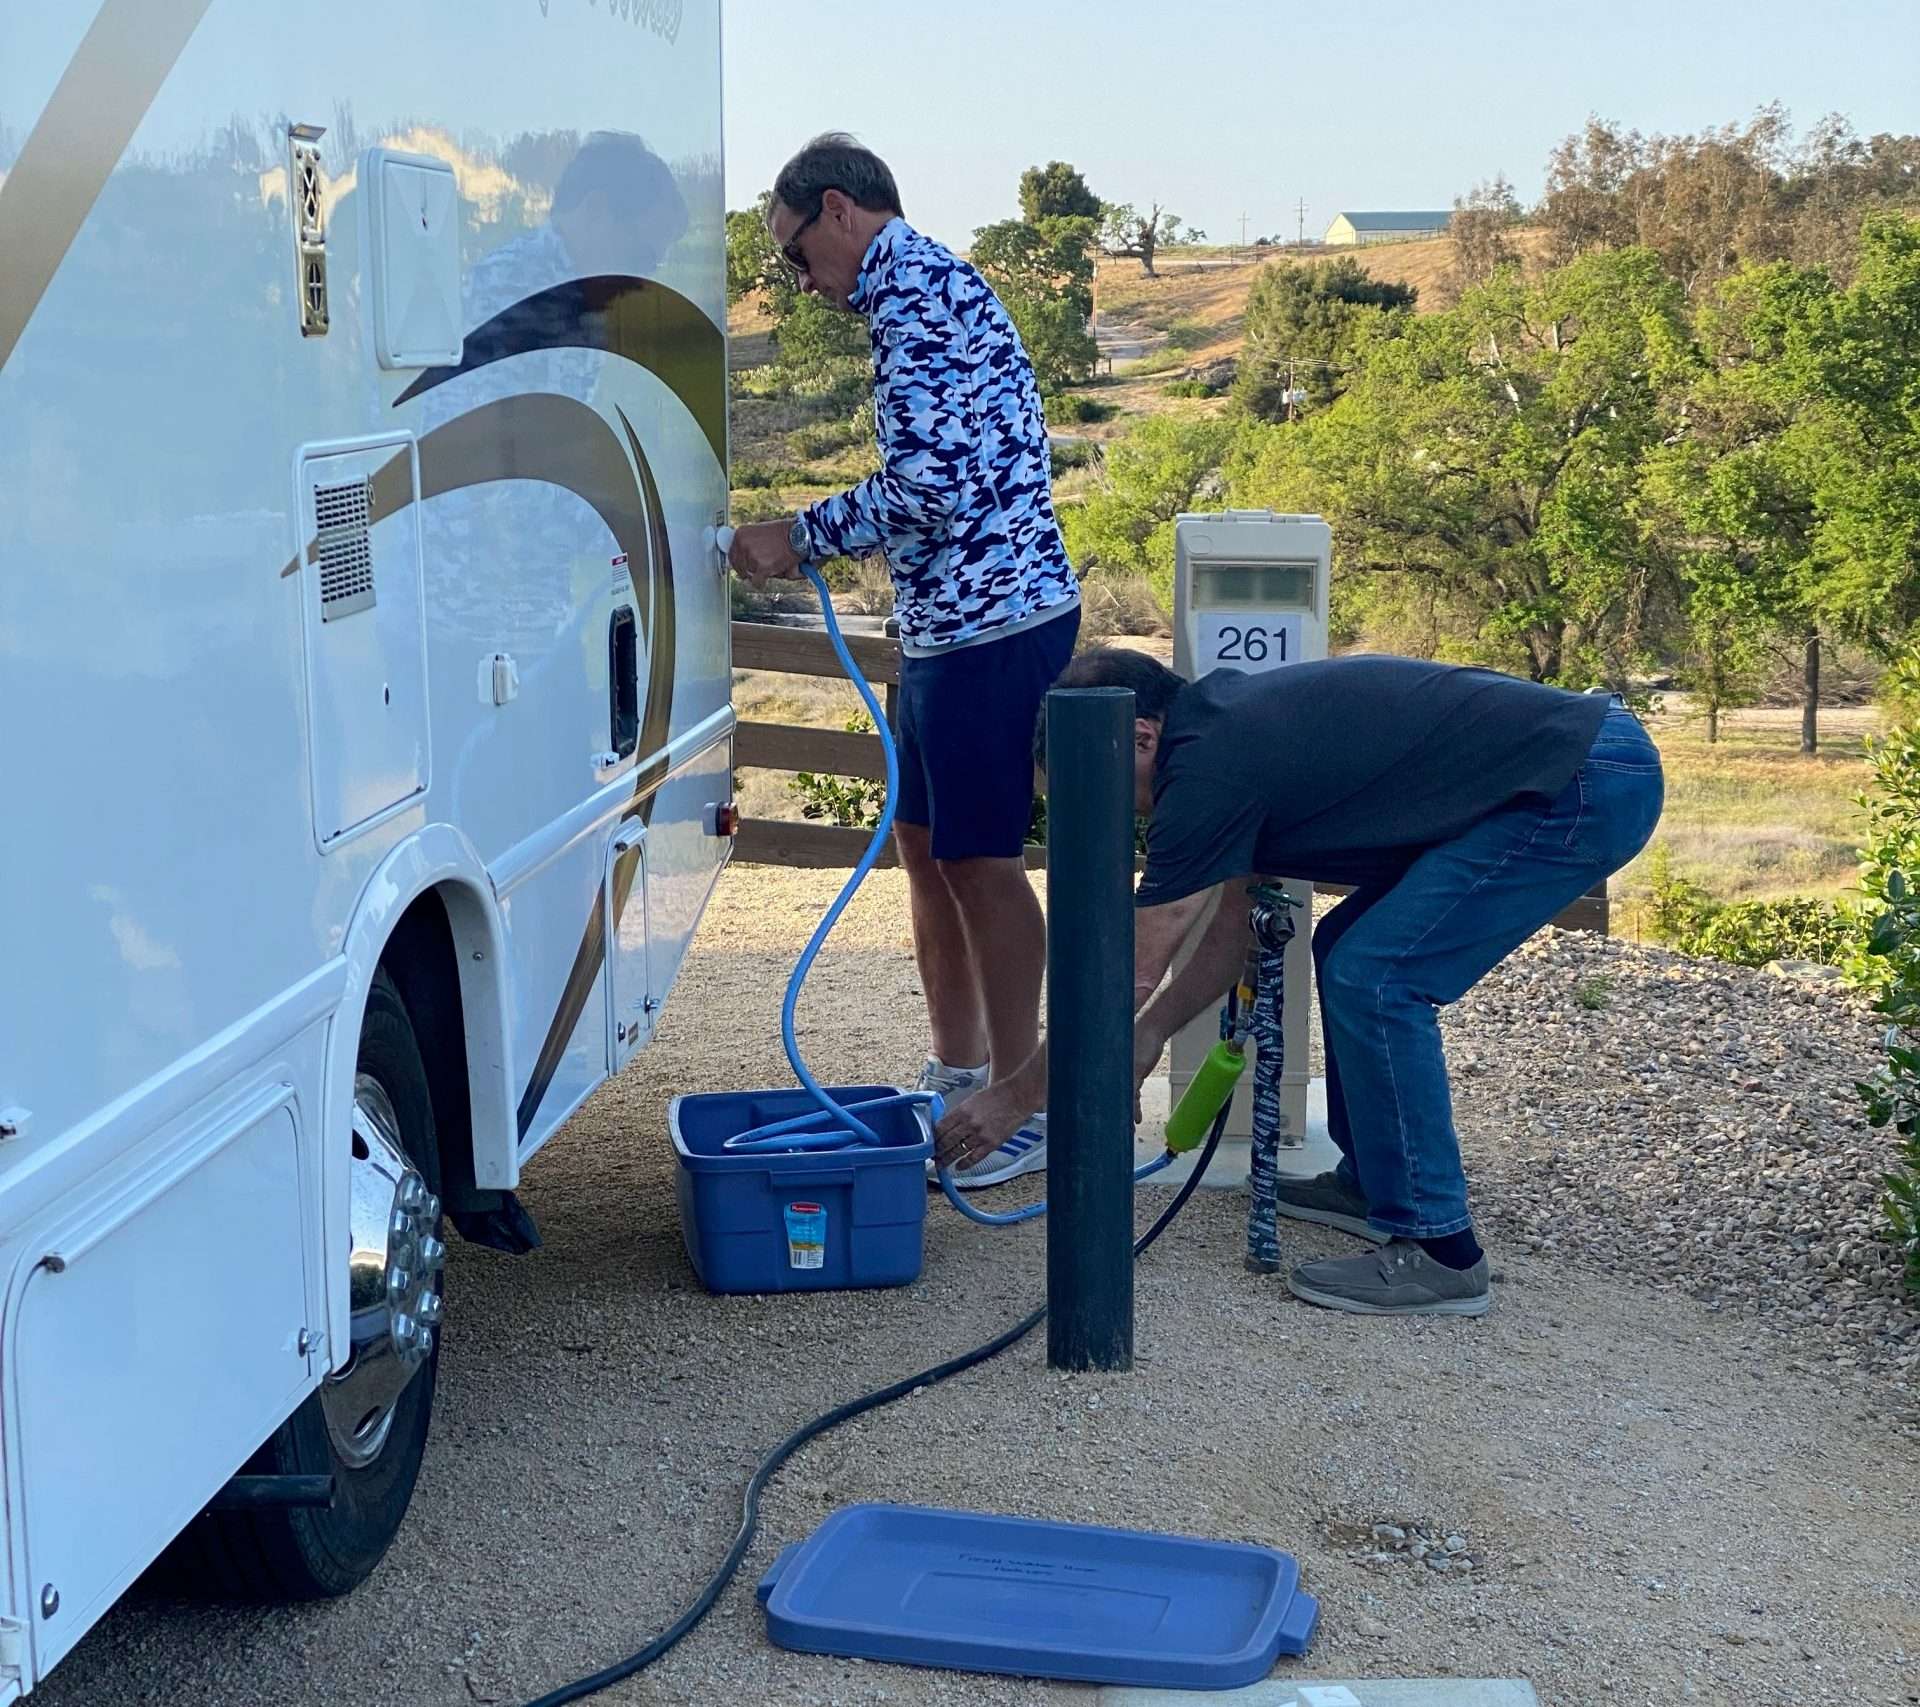 Couple hooking up RV to water system to refill water tank